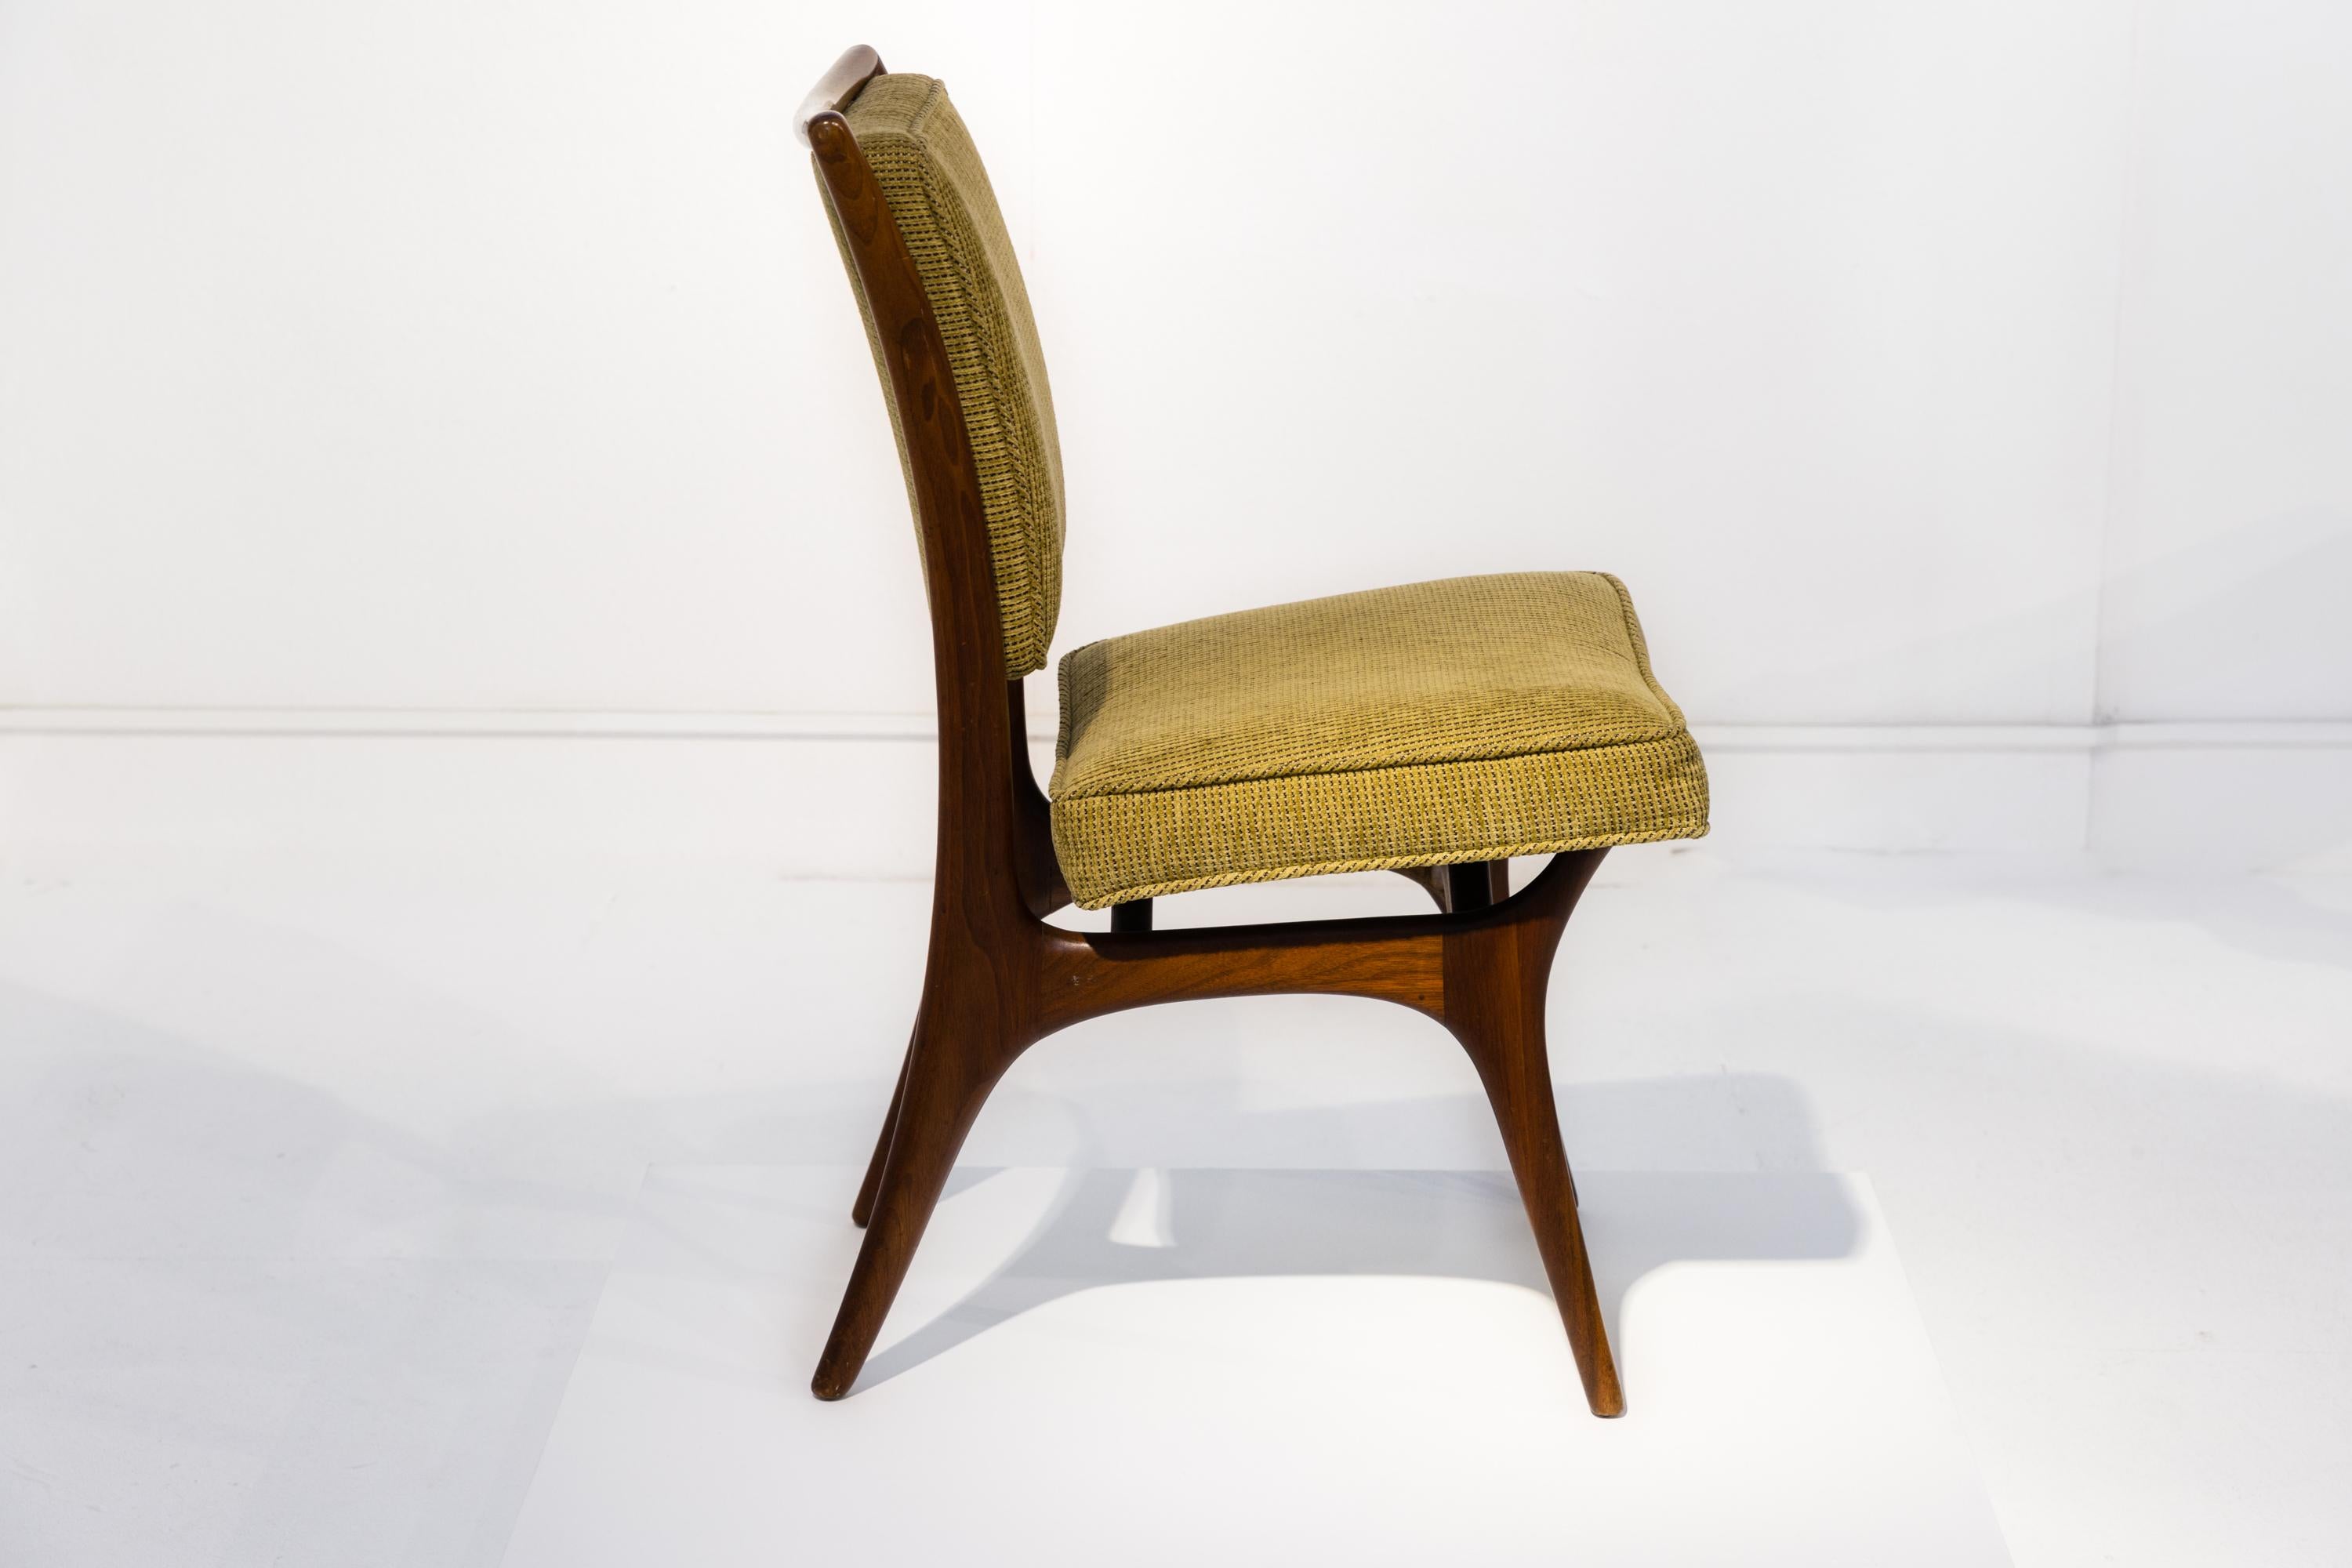 An original Vladimir Kagan dining chair with signature, in very good condition, from the 1950s. Sculptural walnut frame, upholstered seat and back.